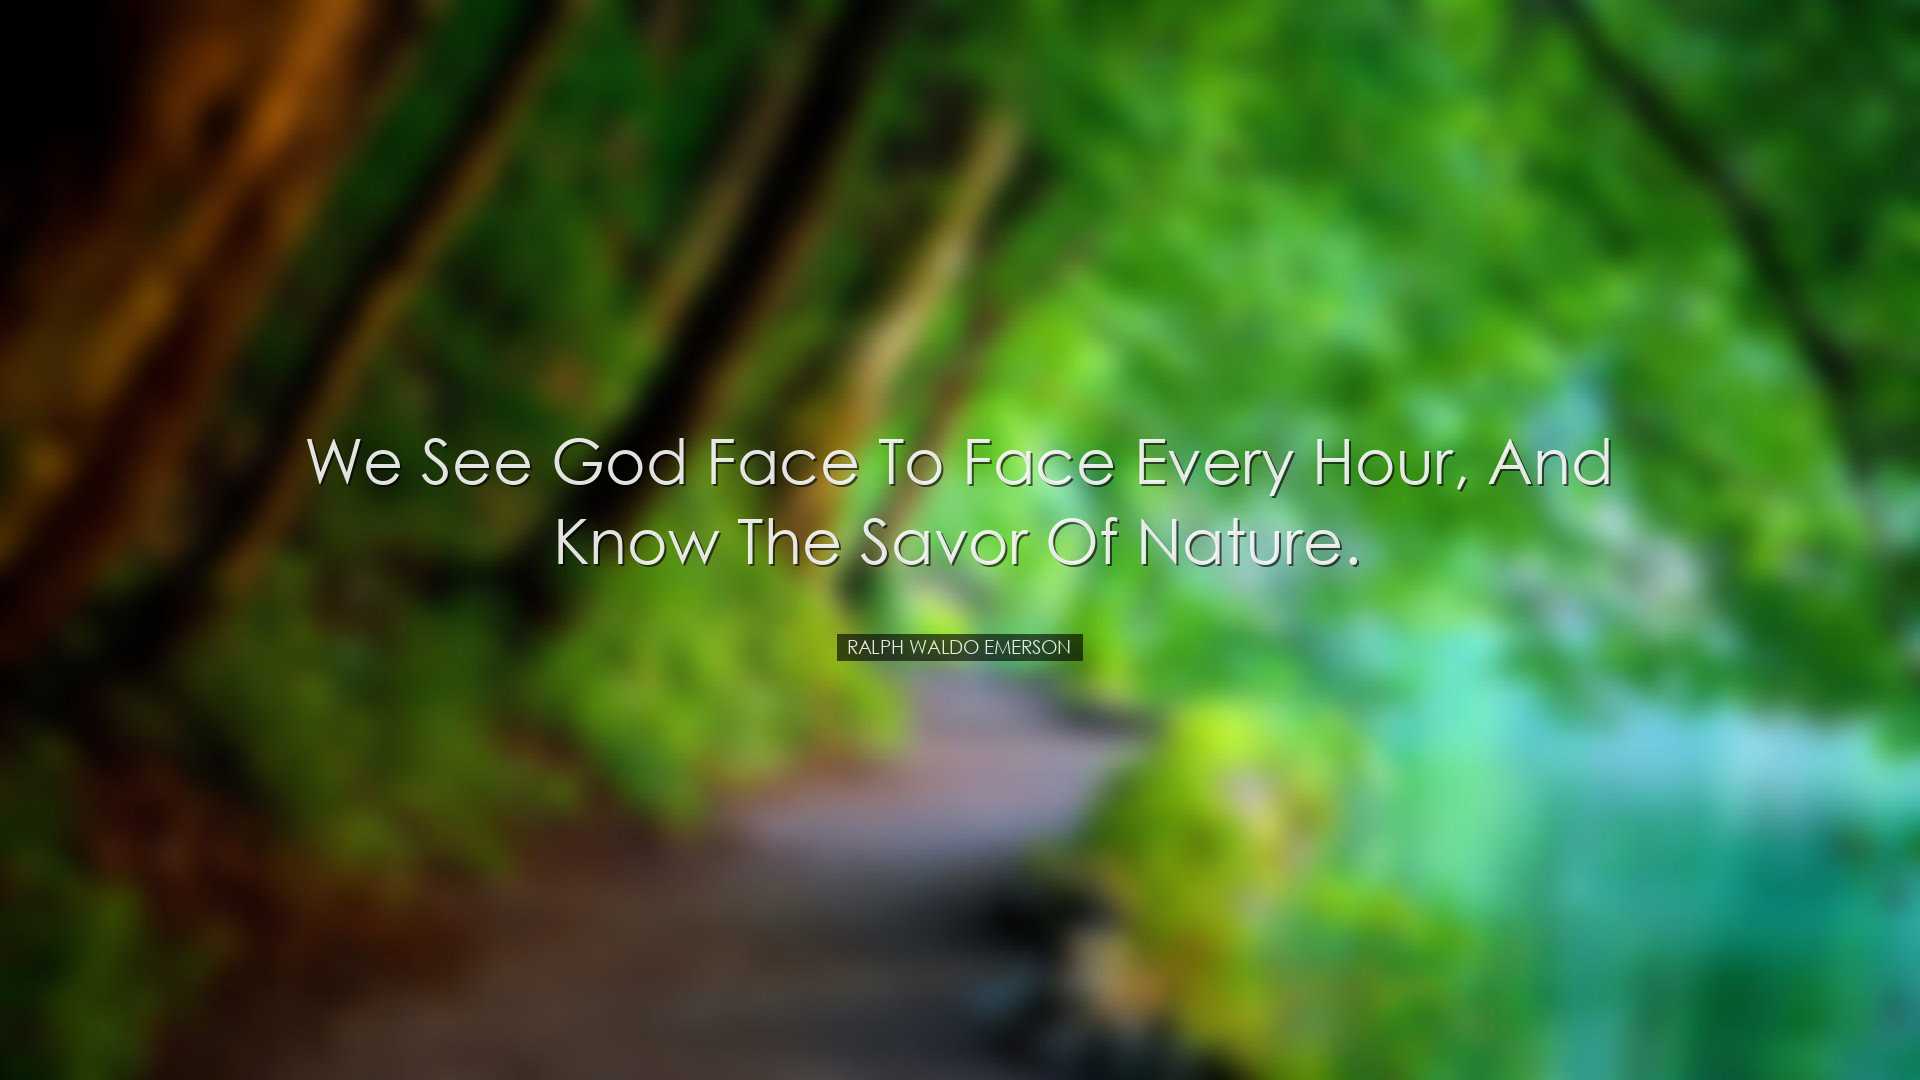 We see God face to face every hour, and know the savor of Nature.